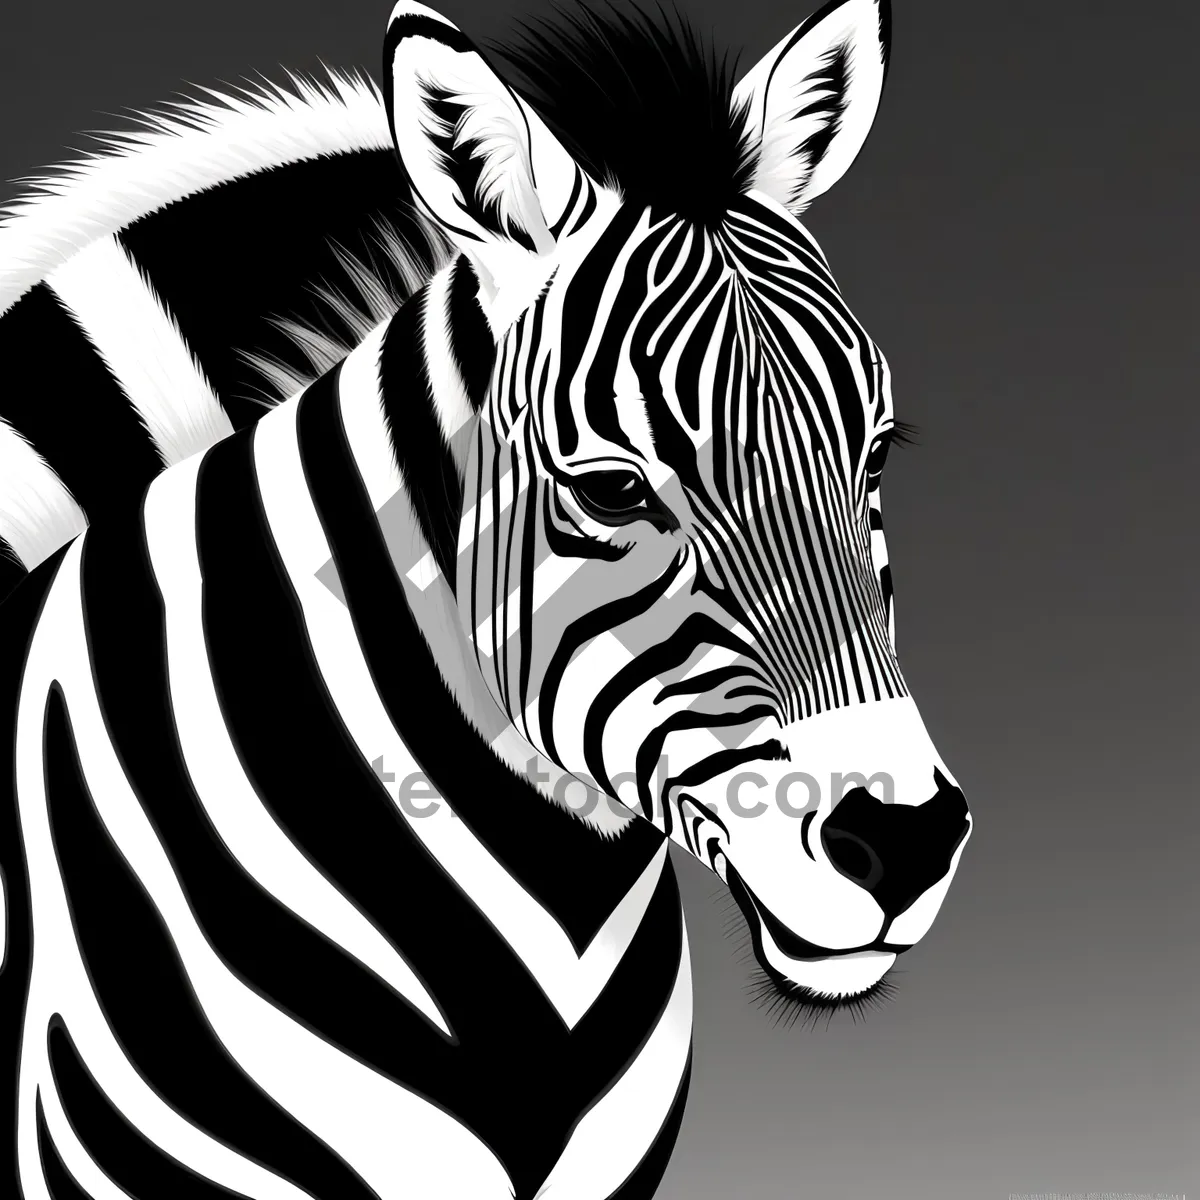 Picture of Wild Zebra Stripes at South African Safari Park